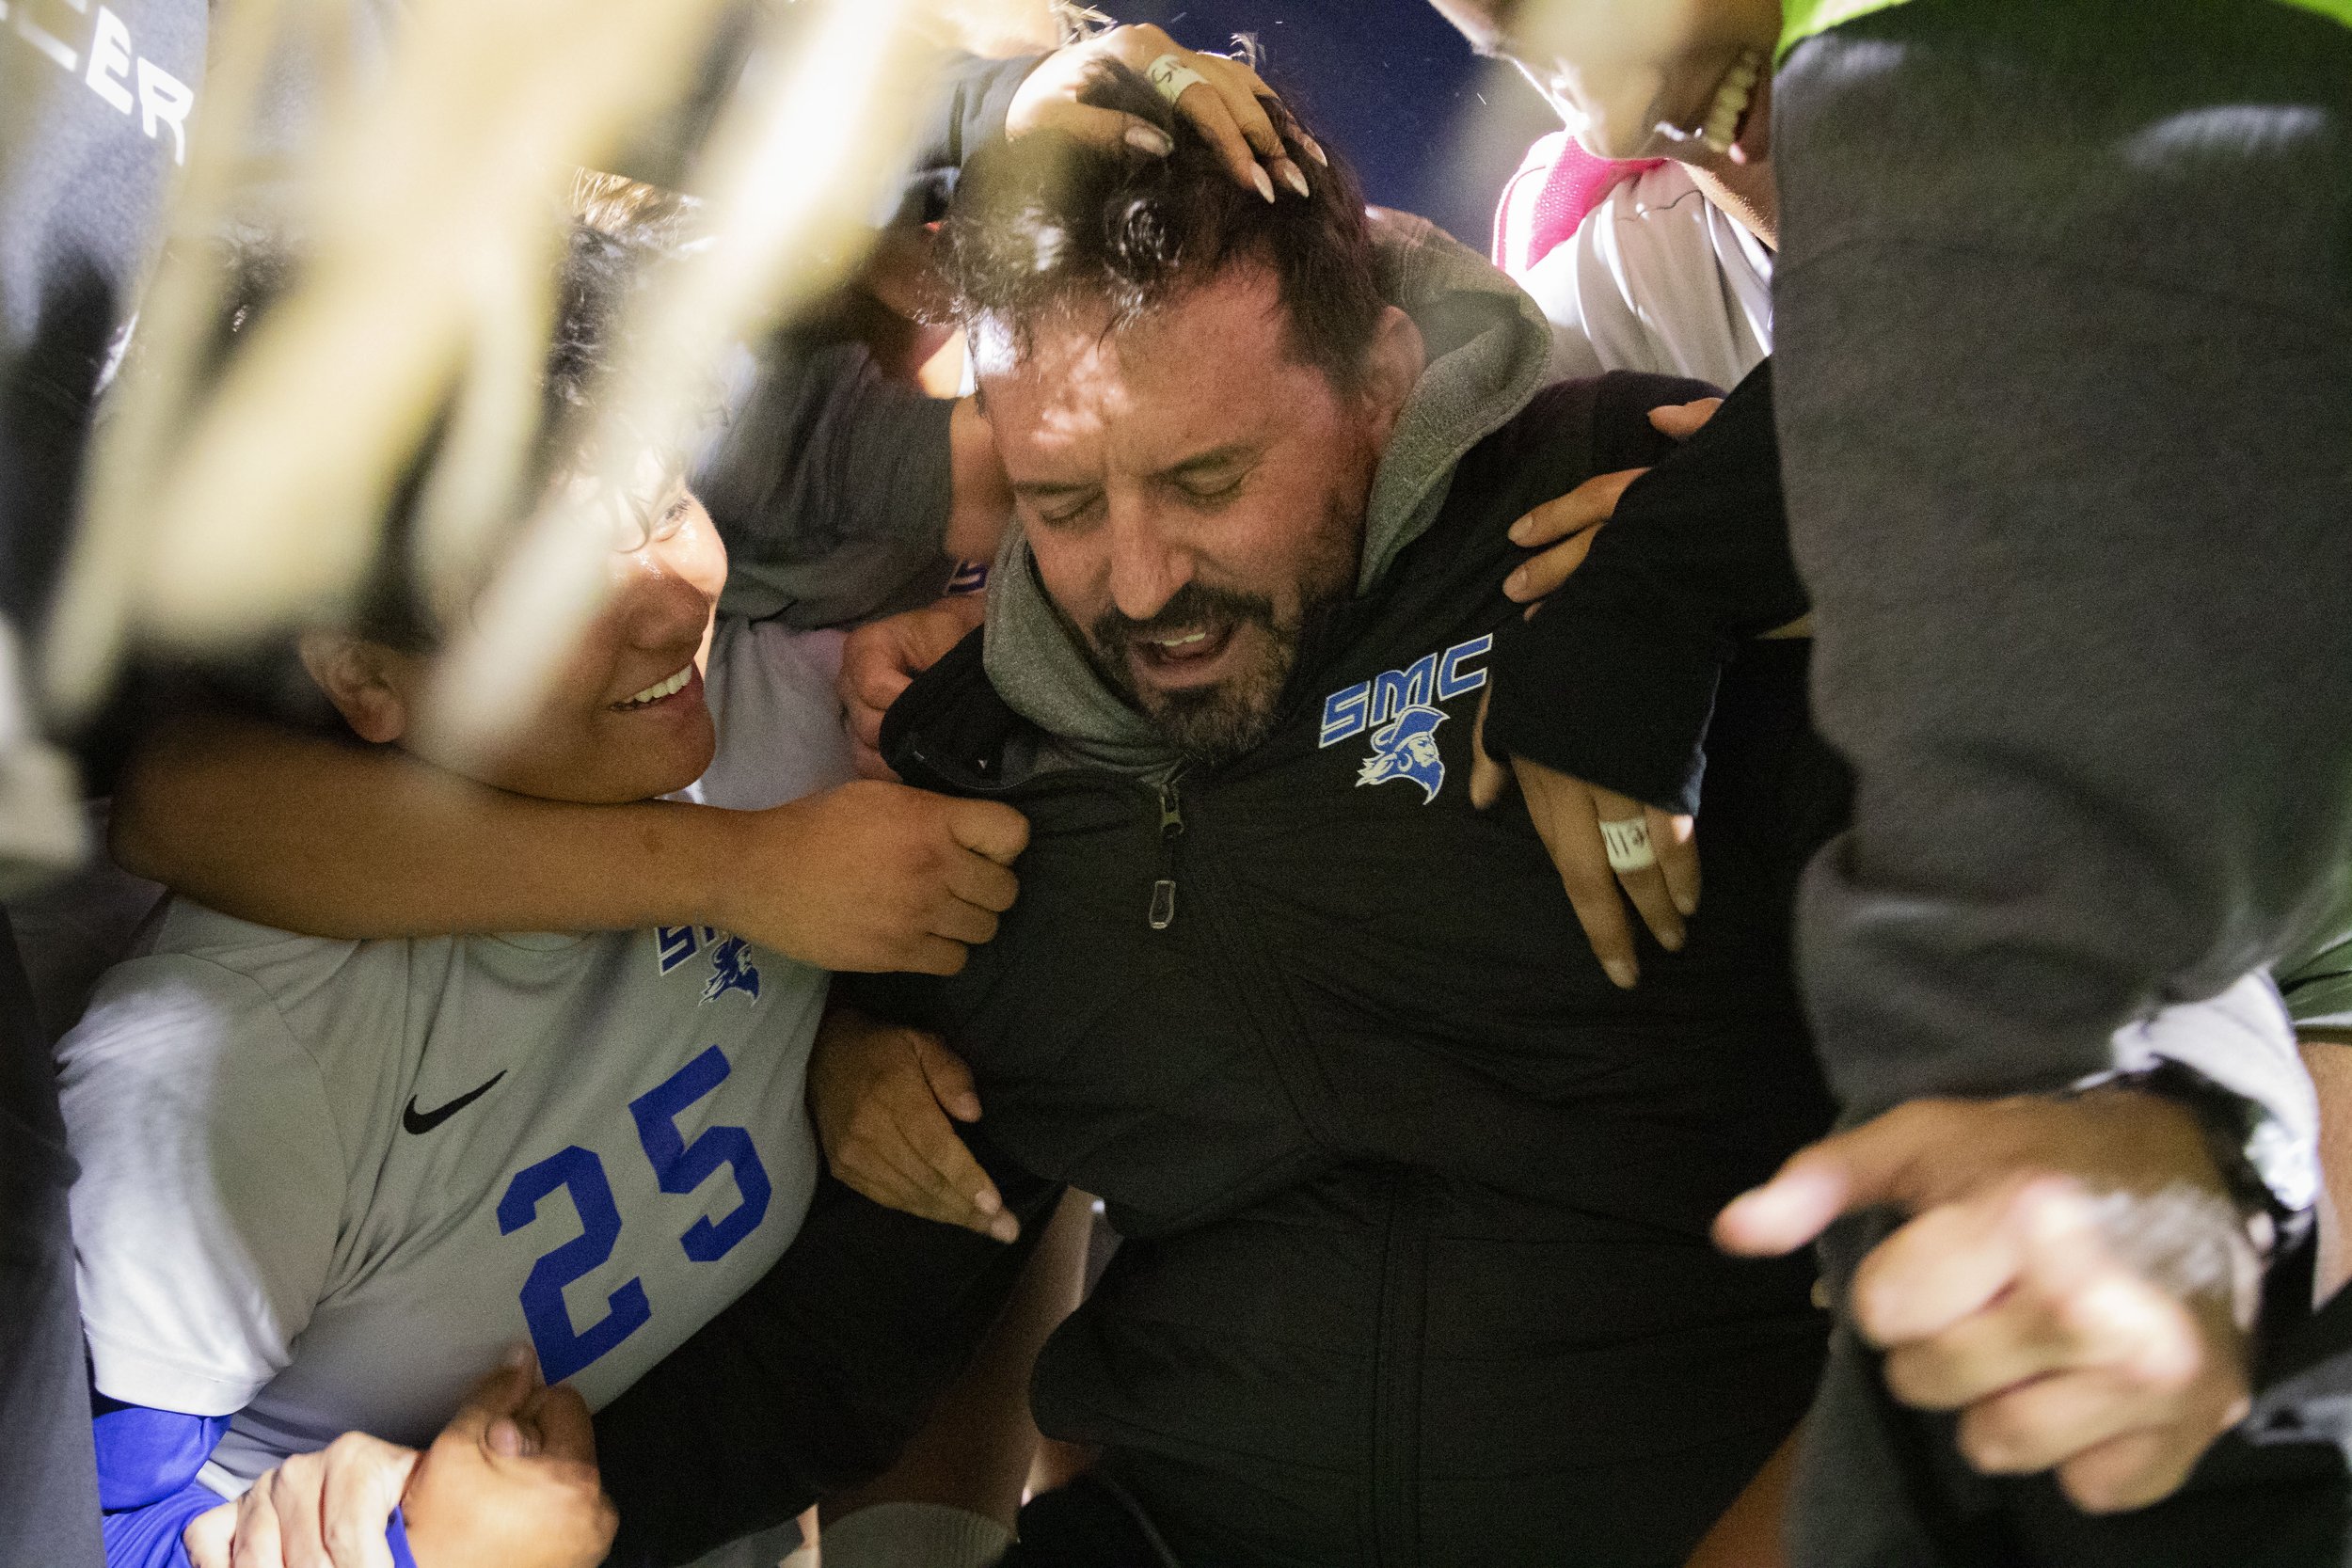  Santa Monica College women’s soccer head coach for the Corsairs Aaron Benditson cries with excitement because the Corsairs defeated the Saddleback College Bobcats, their first defeat of the season, at Saddleback College in Mission Viejo, Calif., on 